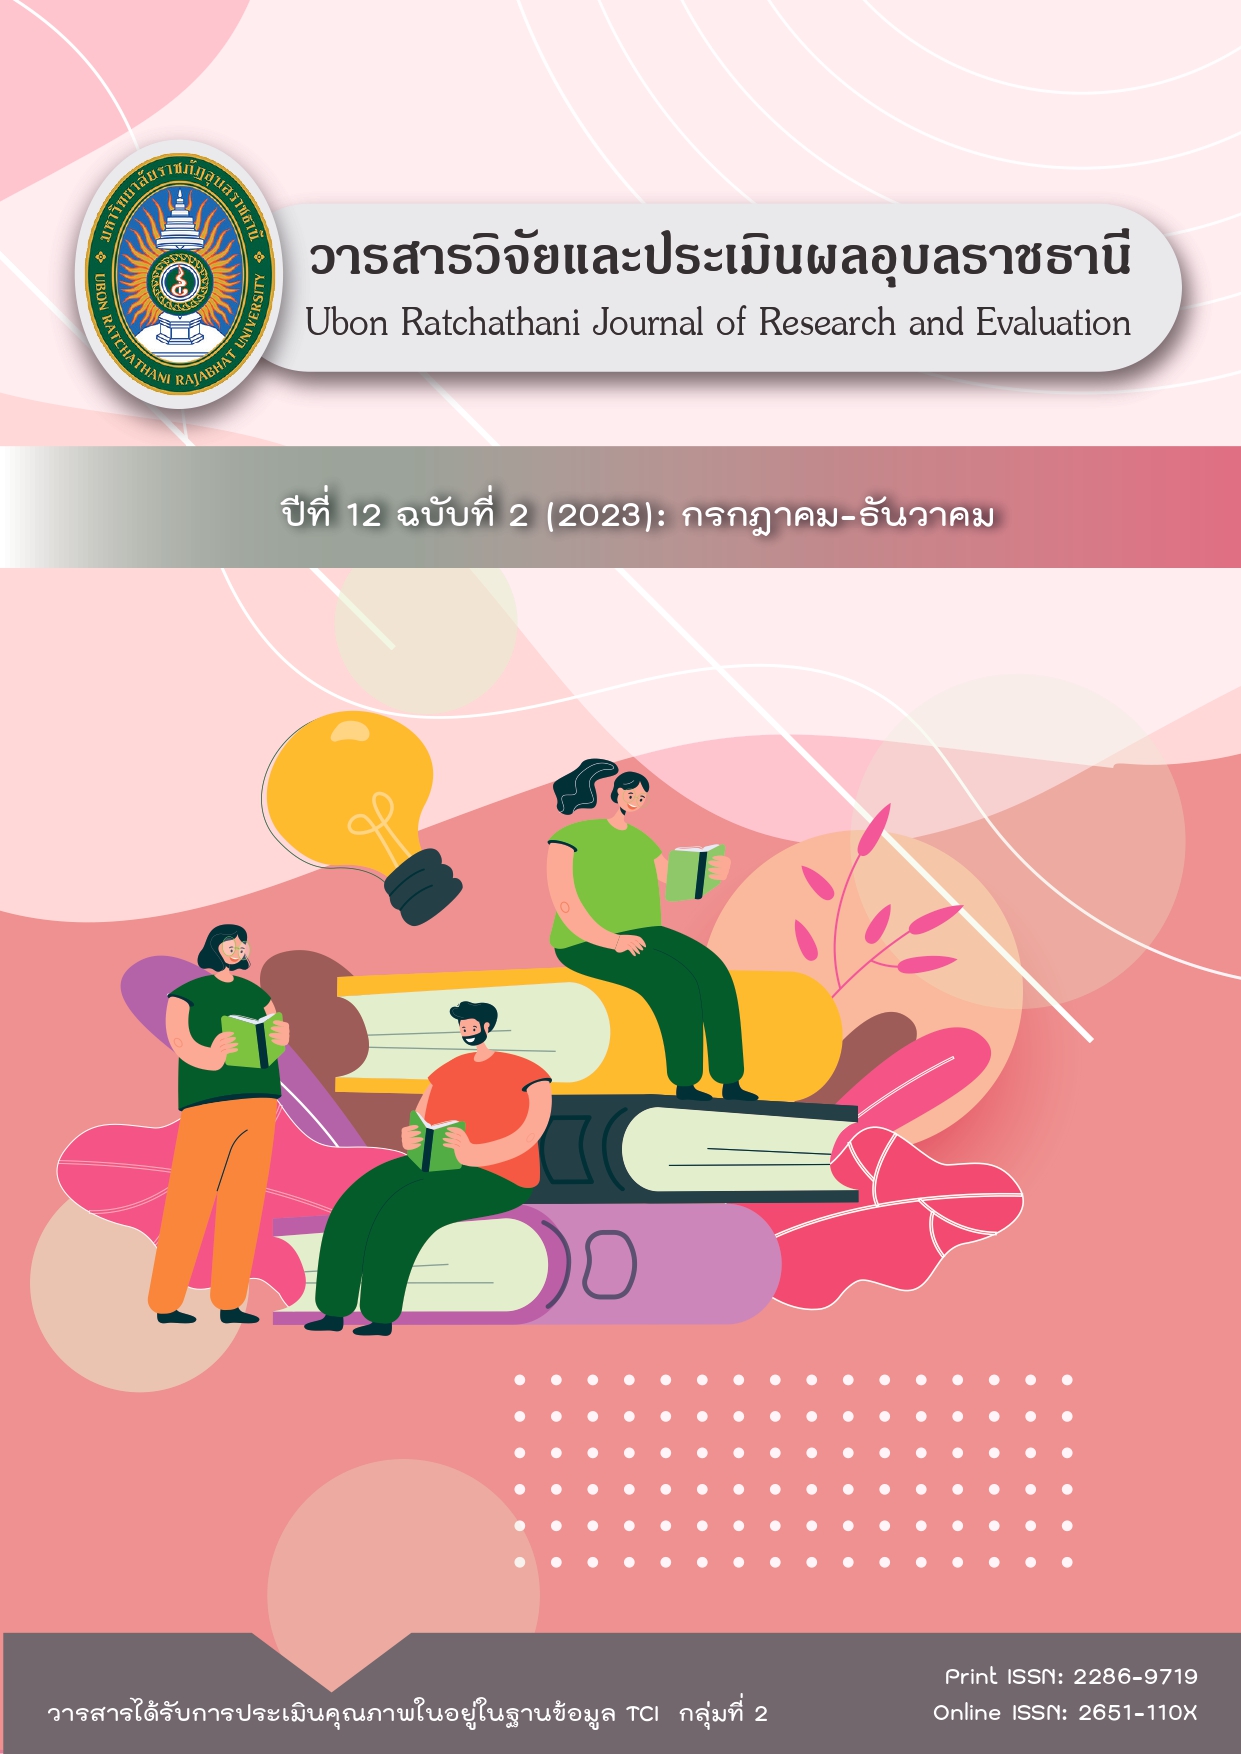 					View Vol. 12 No. 2 (2023): Ubon Ratchathani Journal of Research and Evaluation
				